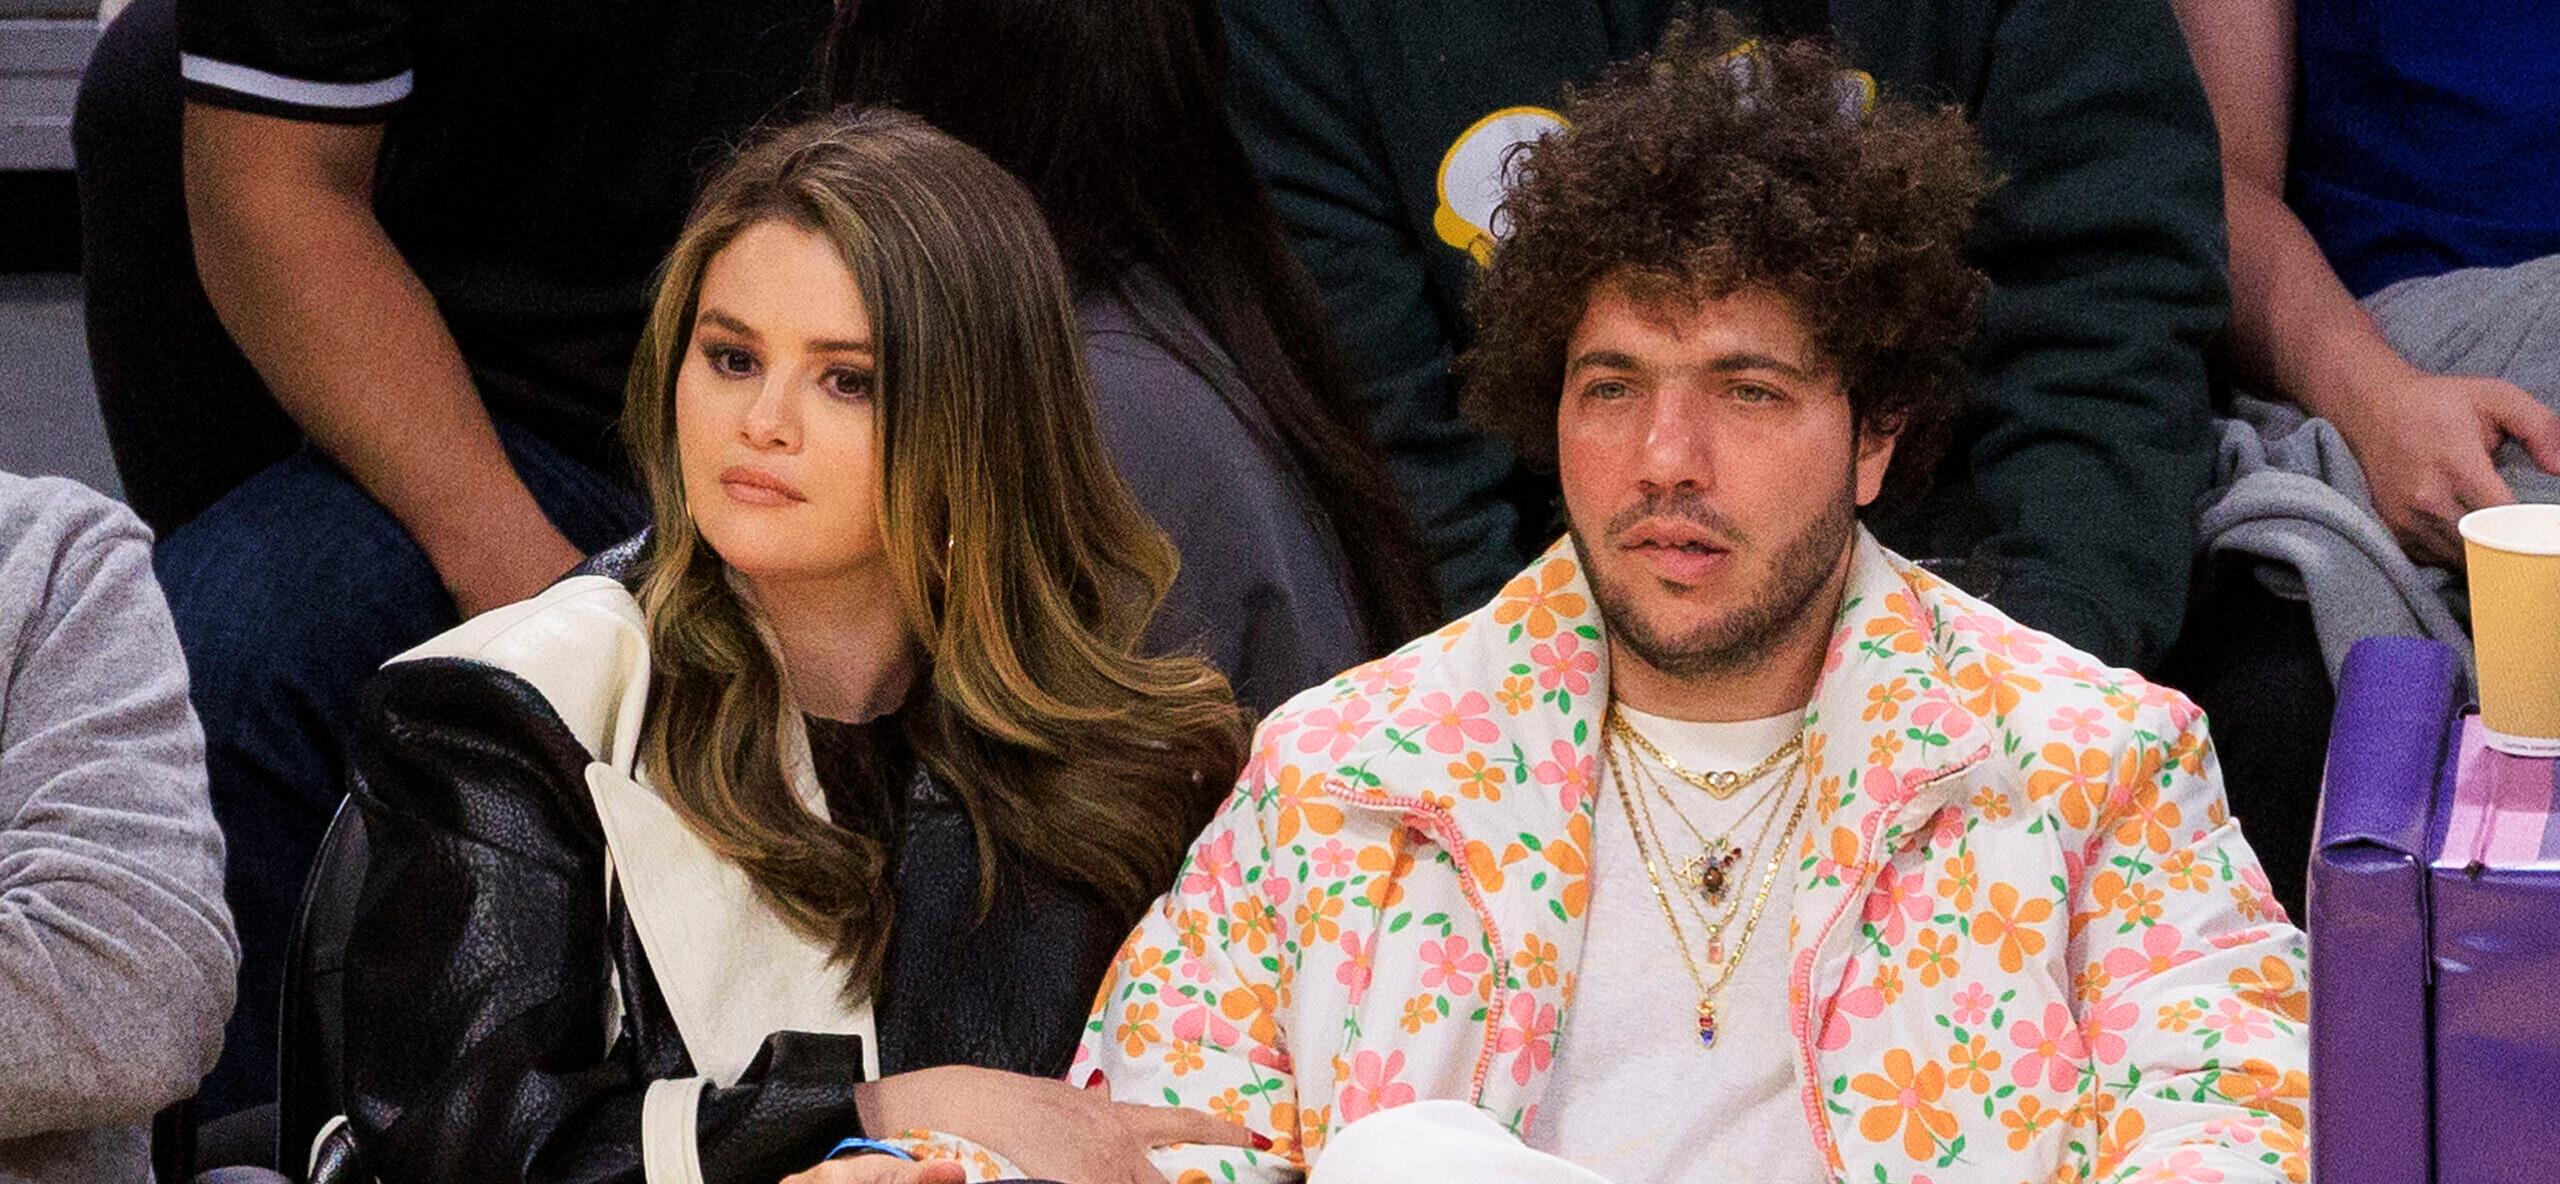 Selena Gomez And Benny Blanco’s Relationship Heats Up: Could An Engagement Be On The Way?